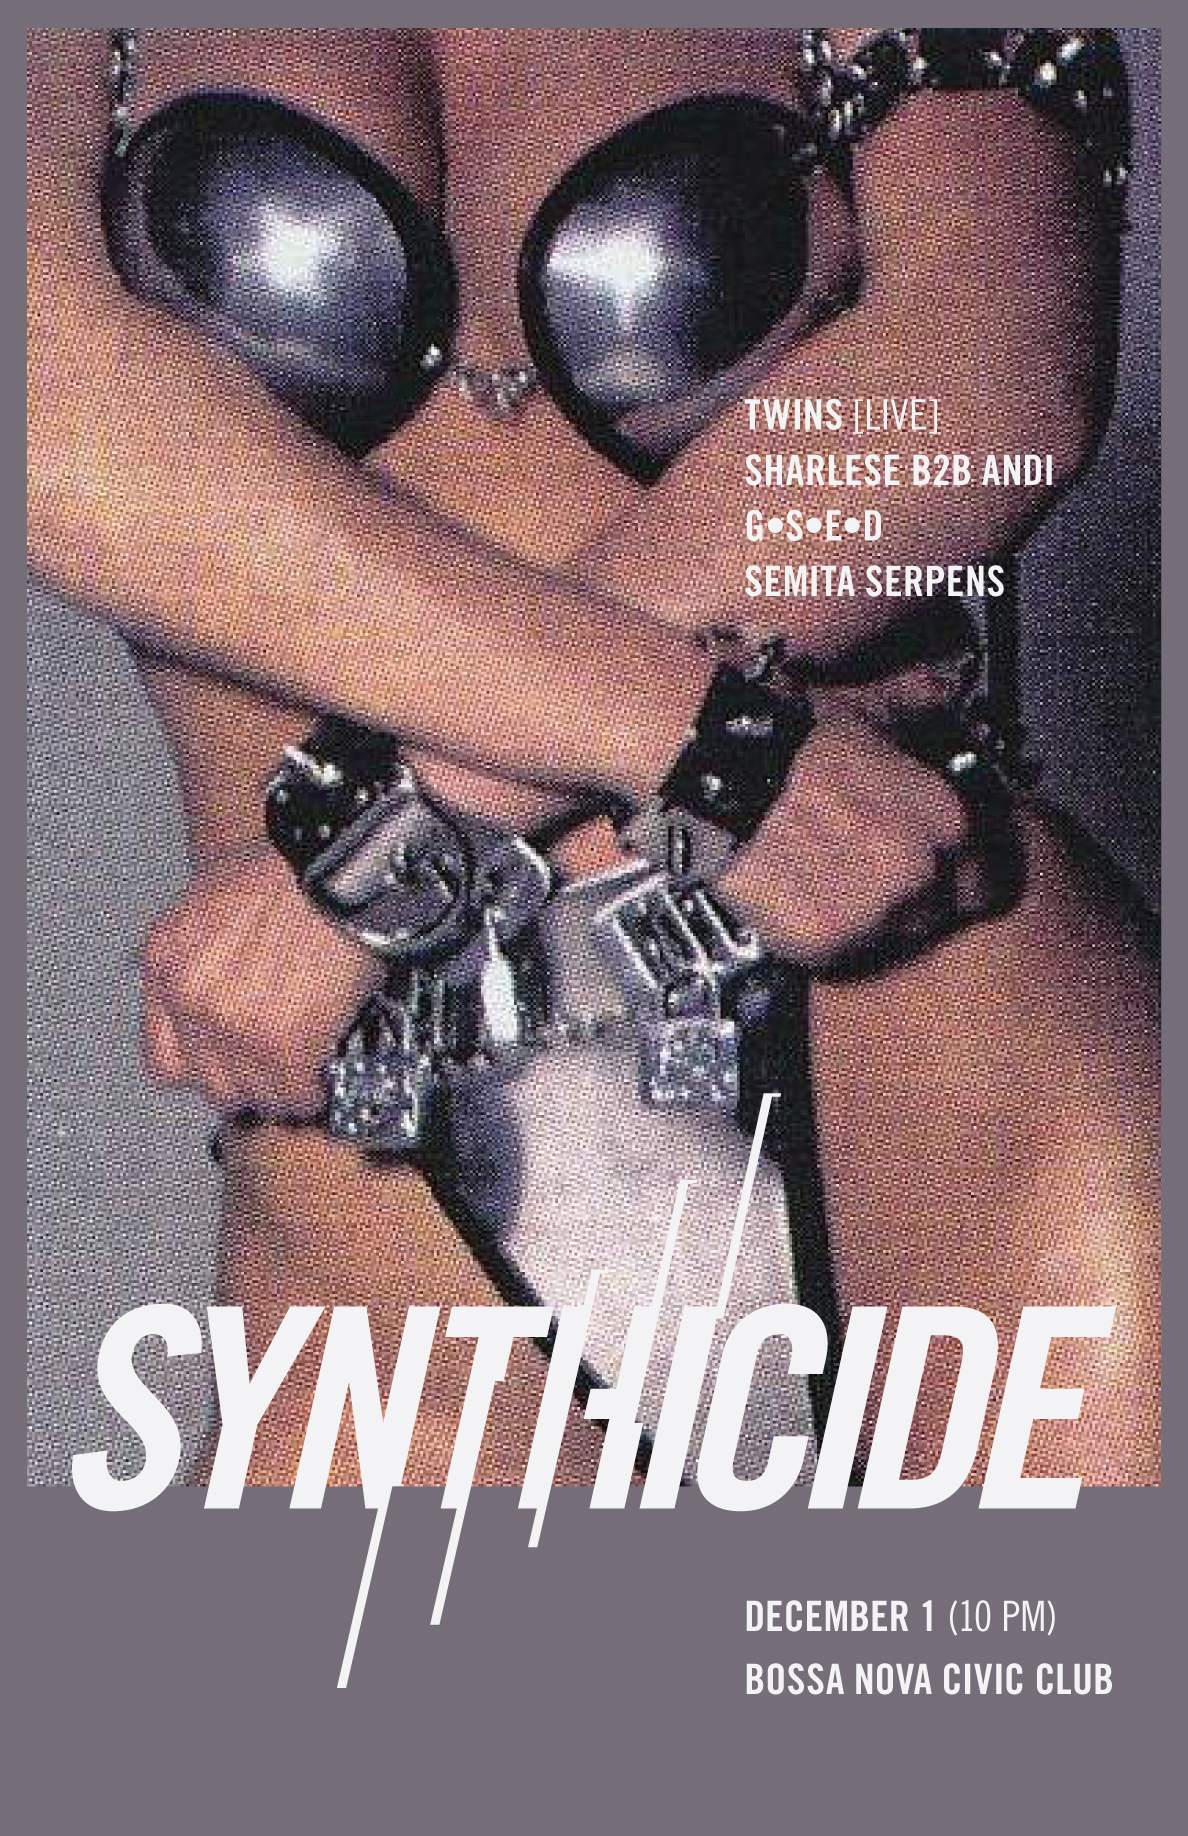 Synthicide: TWINS, Sharlese b2b Andi, G.S.E.D, Semita Serpens - フライヤー表